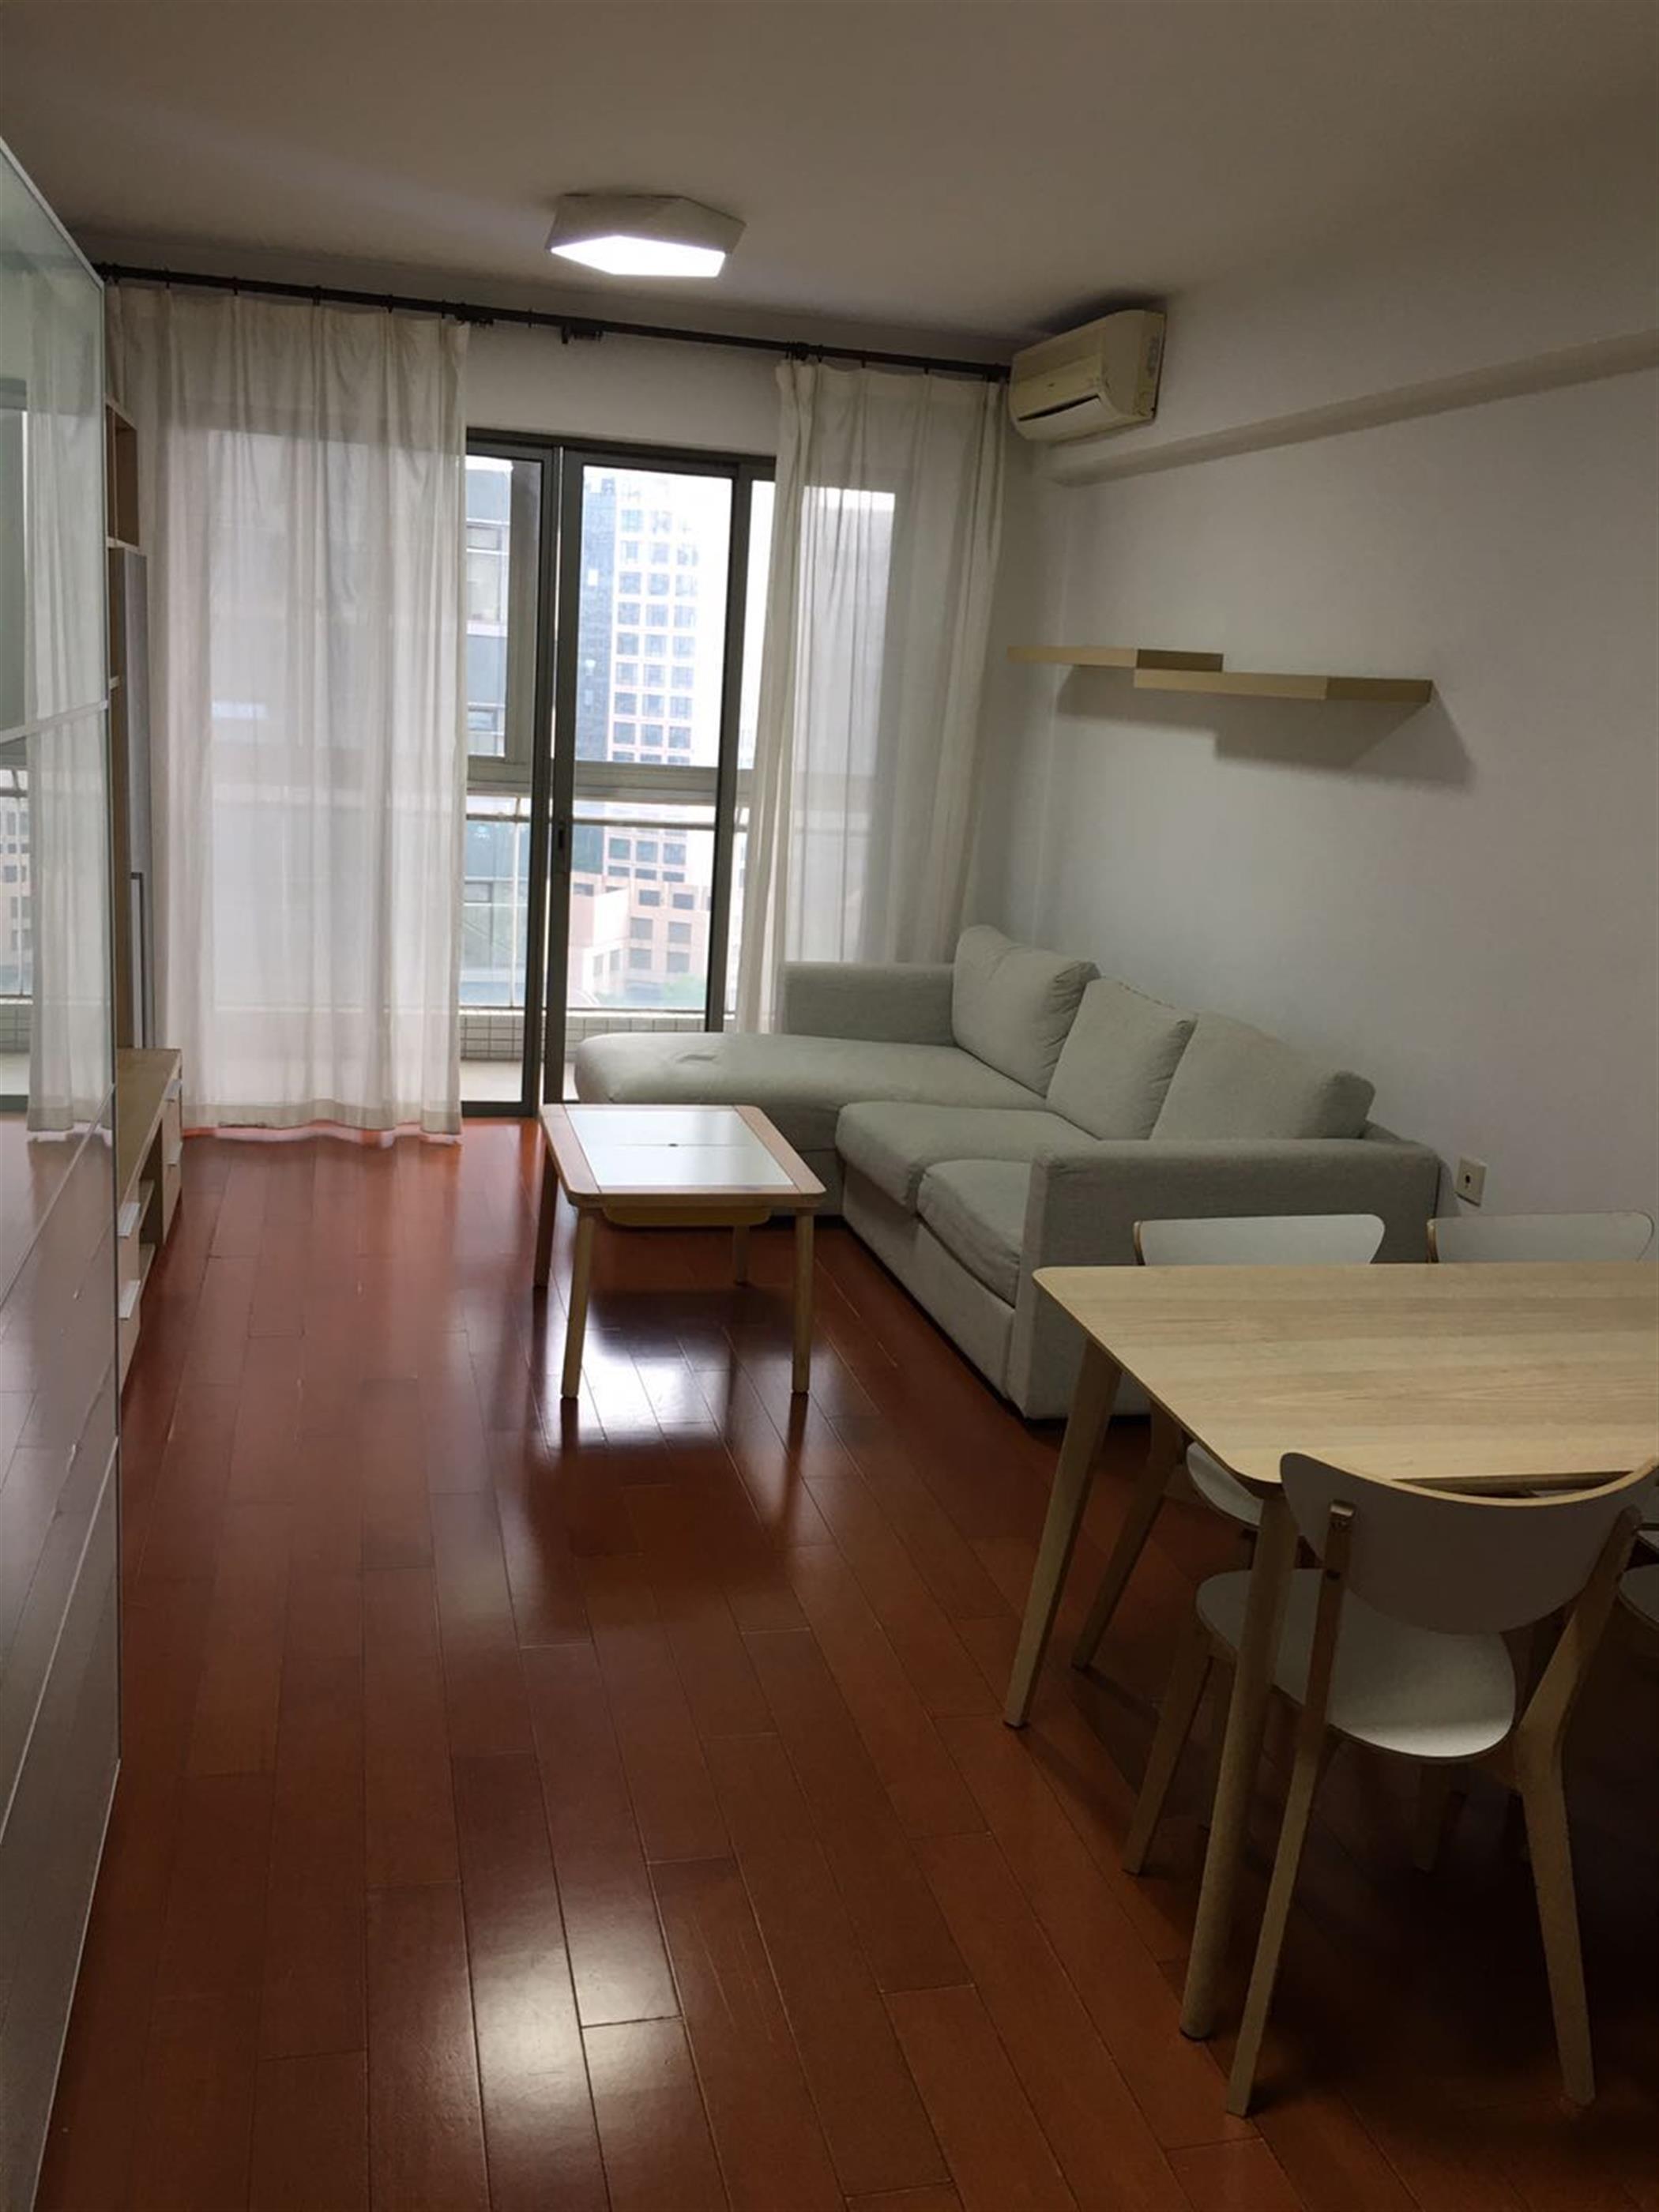 Bright living room Affordable 2BR Suzhou Creek Apartment Nr LN 1/12/13 for Rent in Shanghai